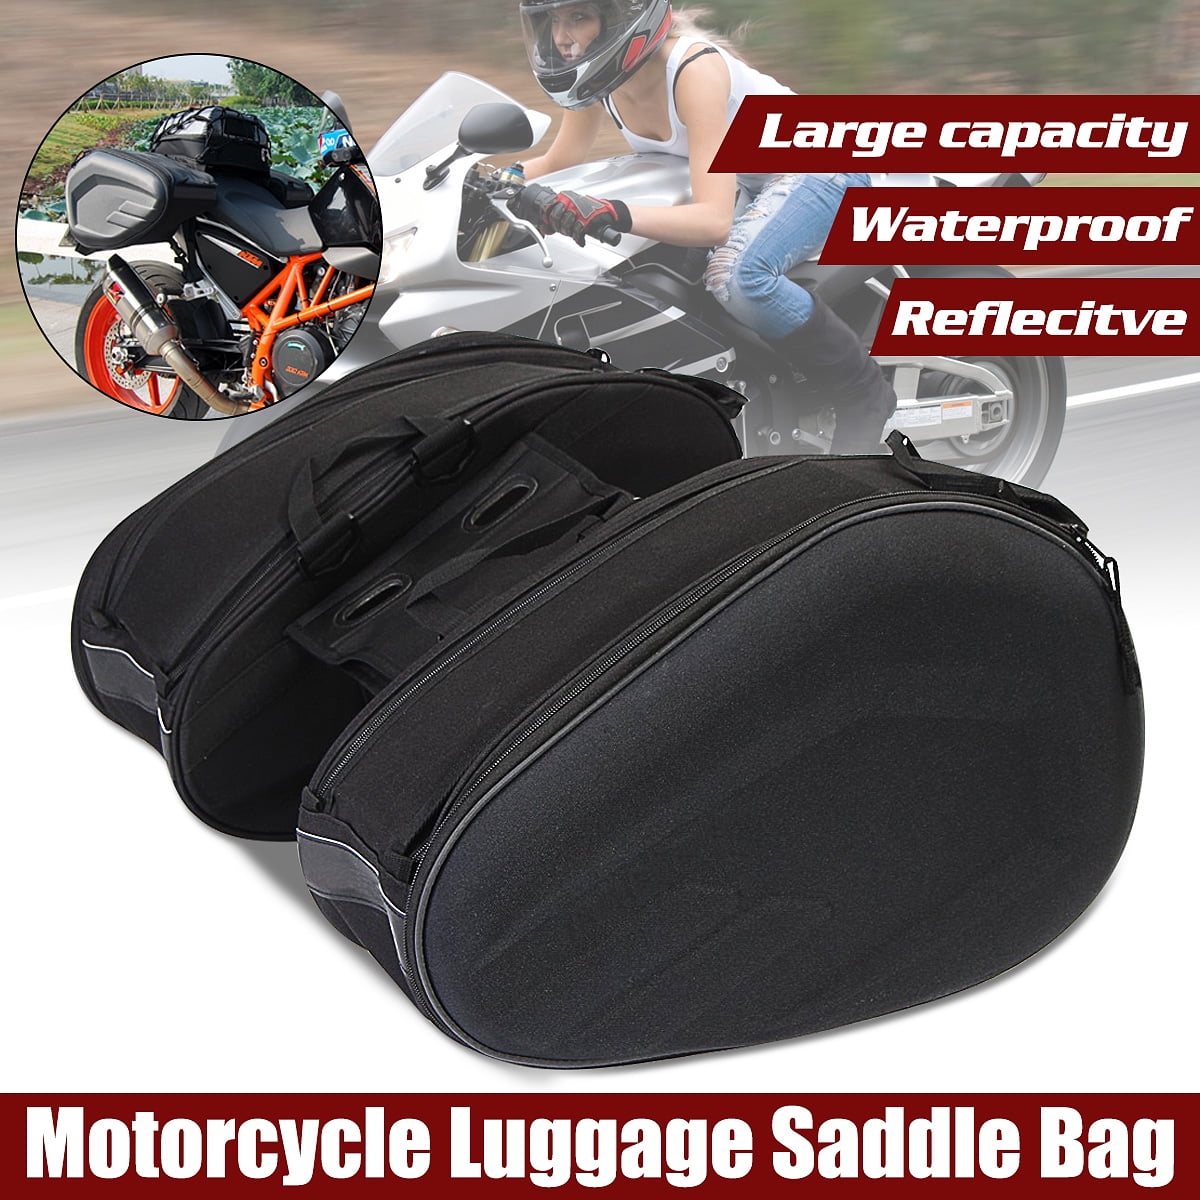 Universal Motorcycle Bike Scooter Pannier Pack Luggage Saddle Bags w/ Rain Cover